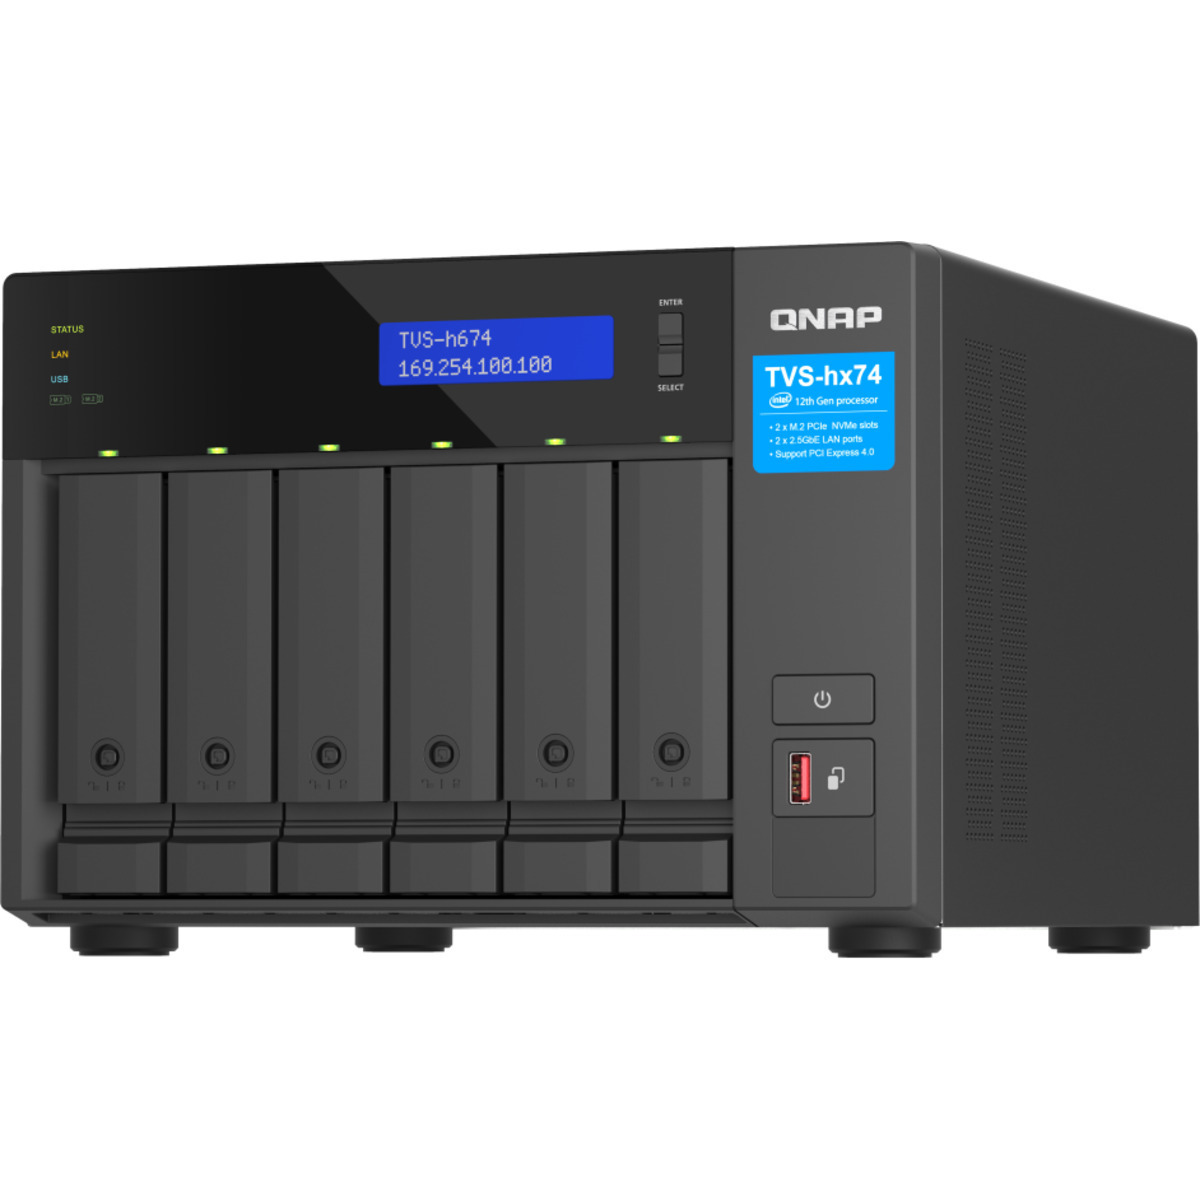 QNAP TVS-h674 Core i3 88tb 6-Bay Desktop Multimedia / Power User / Business NAS - Network Attached Storage Device 4x22tb Western Digital Ultrastar HC570 WUH722222ALE6L4 3.5 7200rpm SATA 6Gb/s HDD ENTERPRISE Class Drives Installed - Burn-In Tested TVS-h674 Core i3